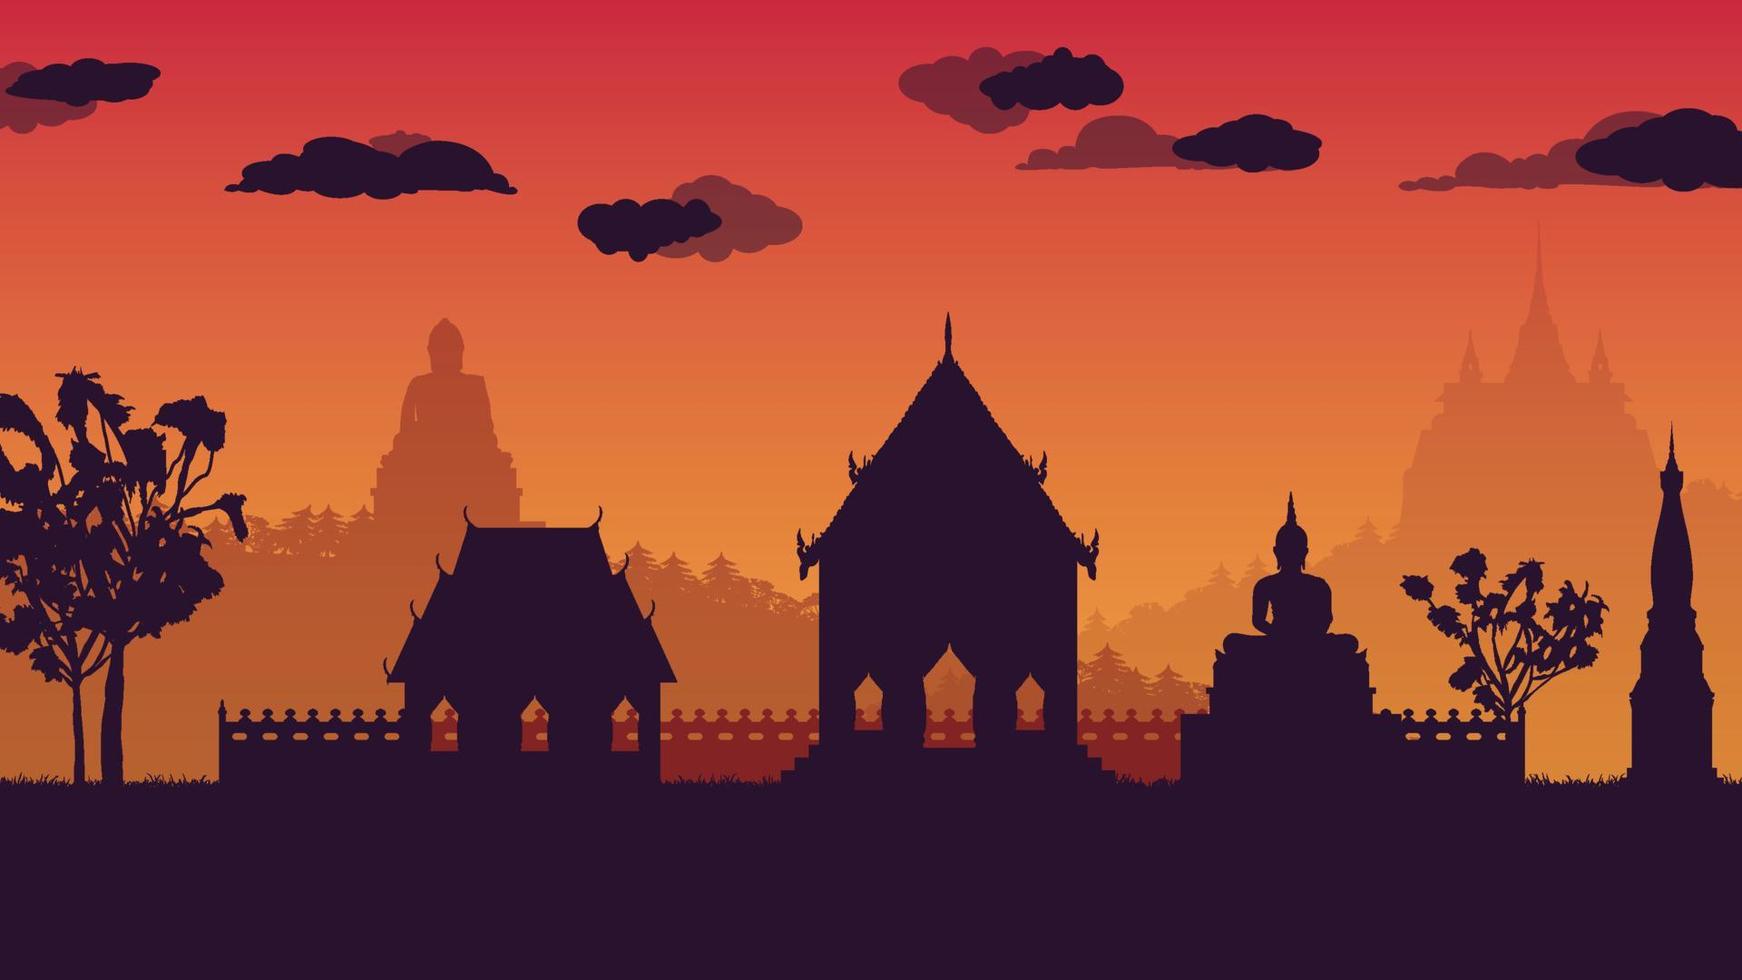 silhouette of traditional Thai temple on gradient background vector